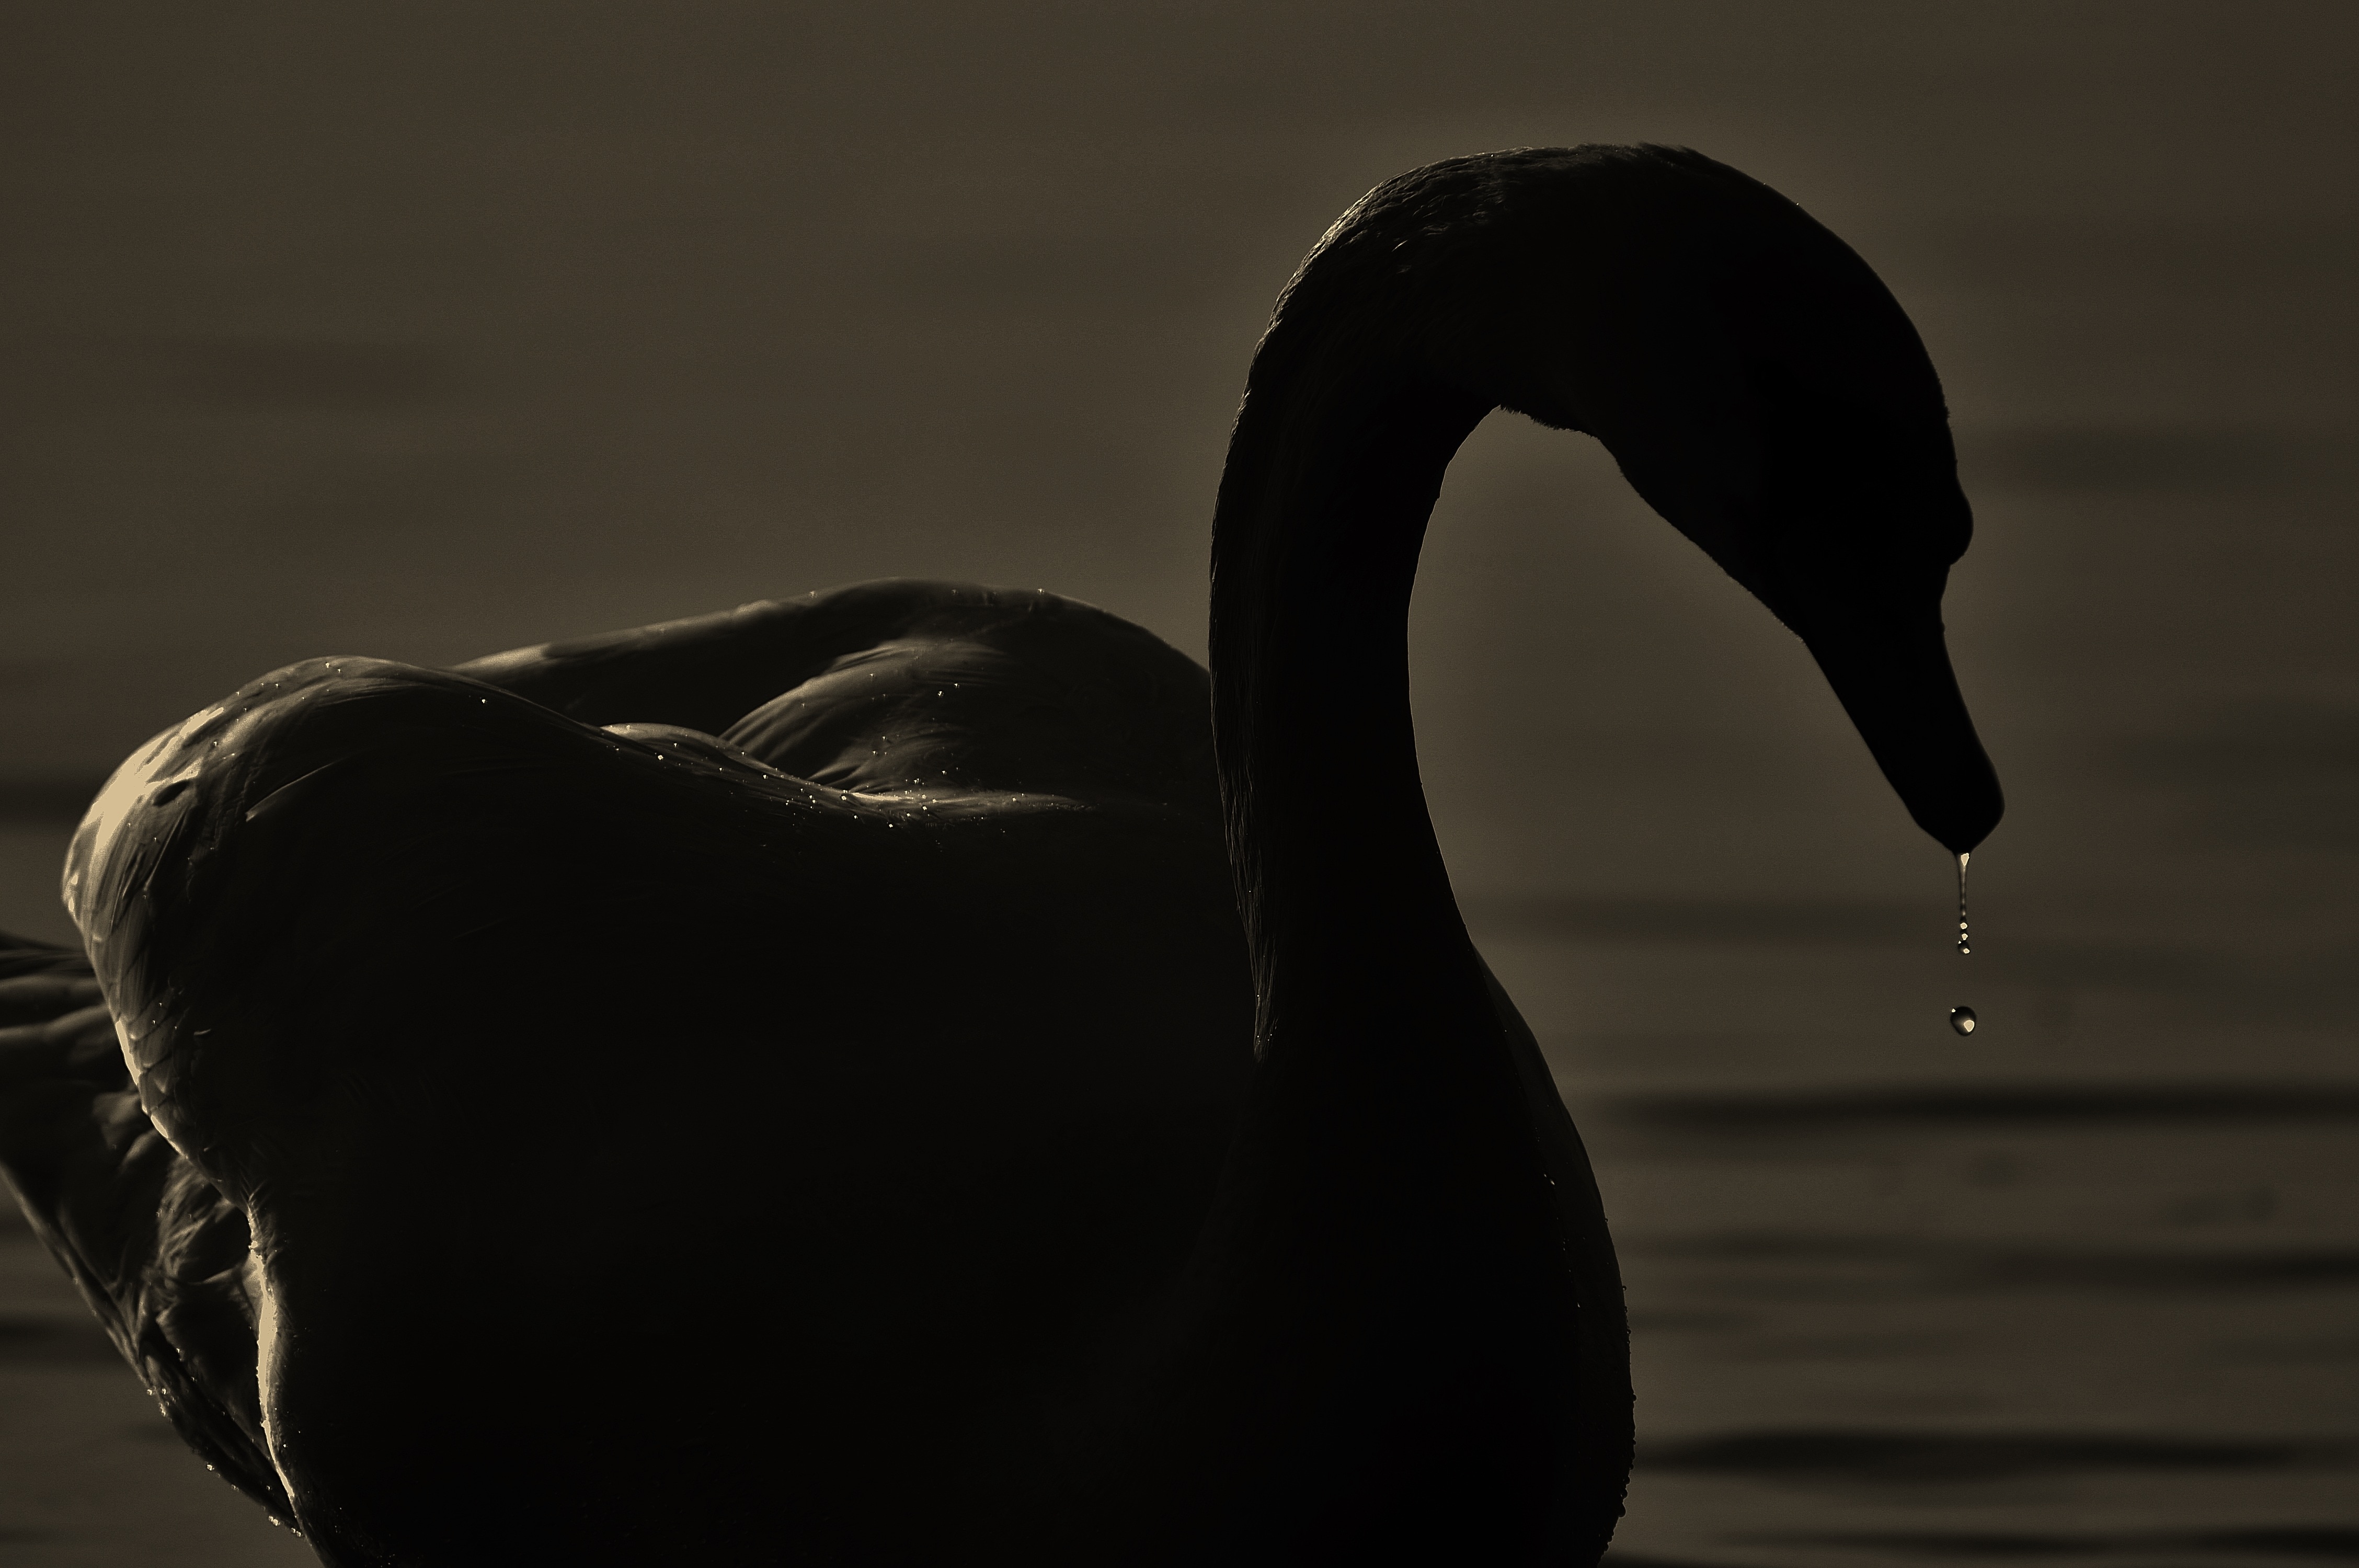 silhouette of swan